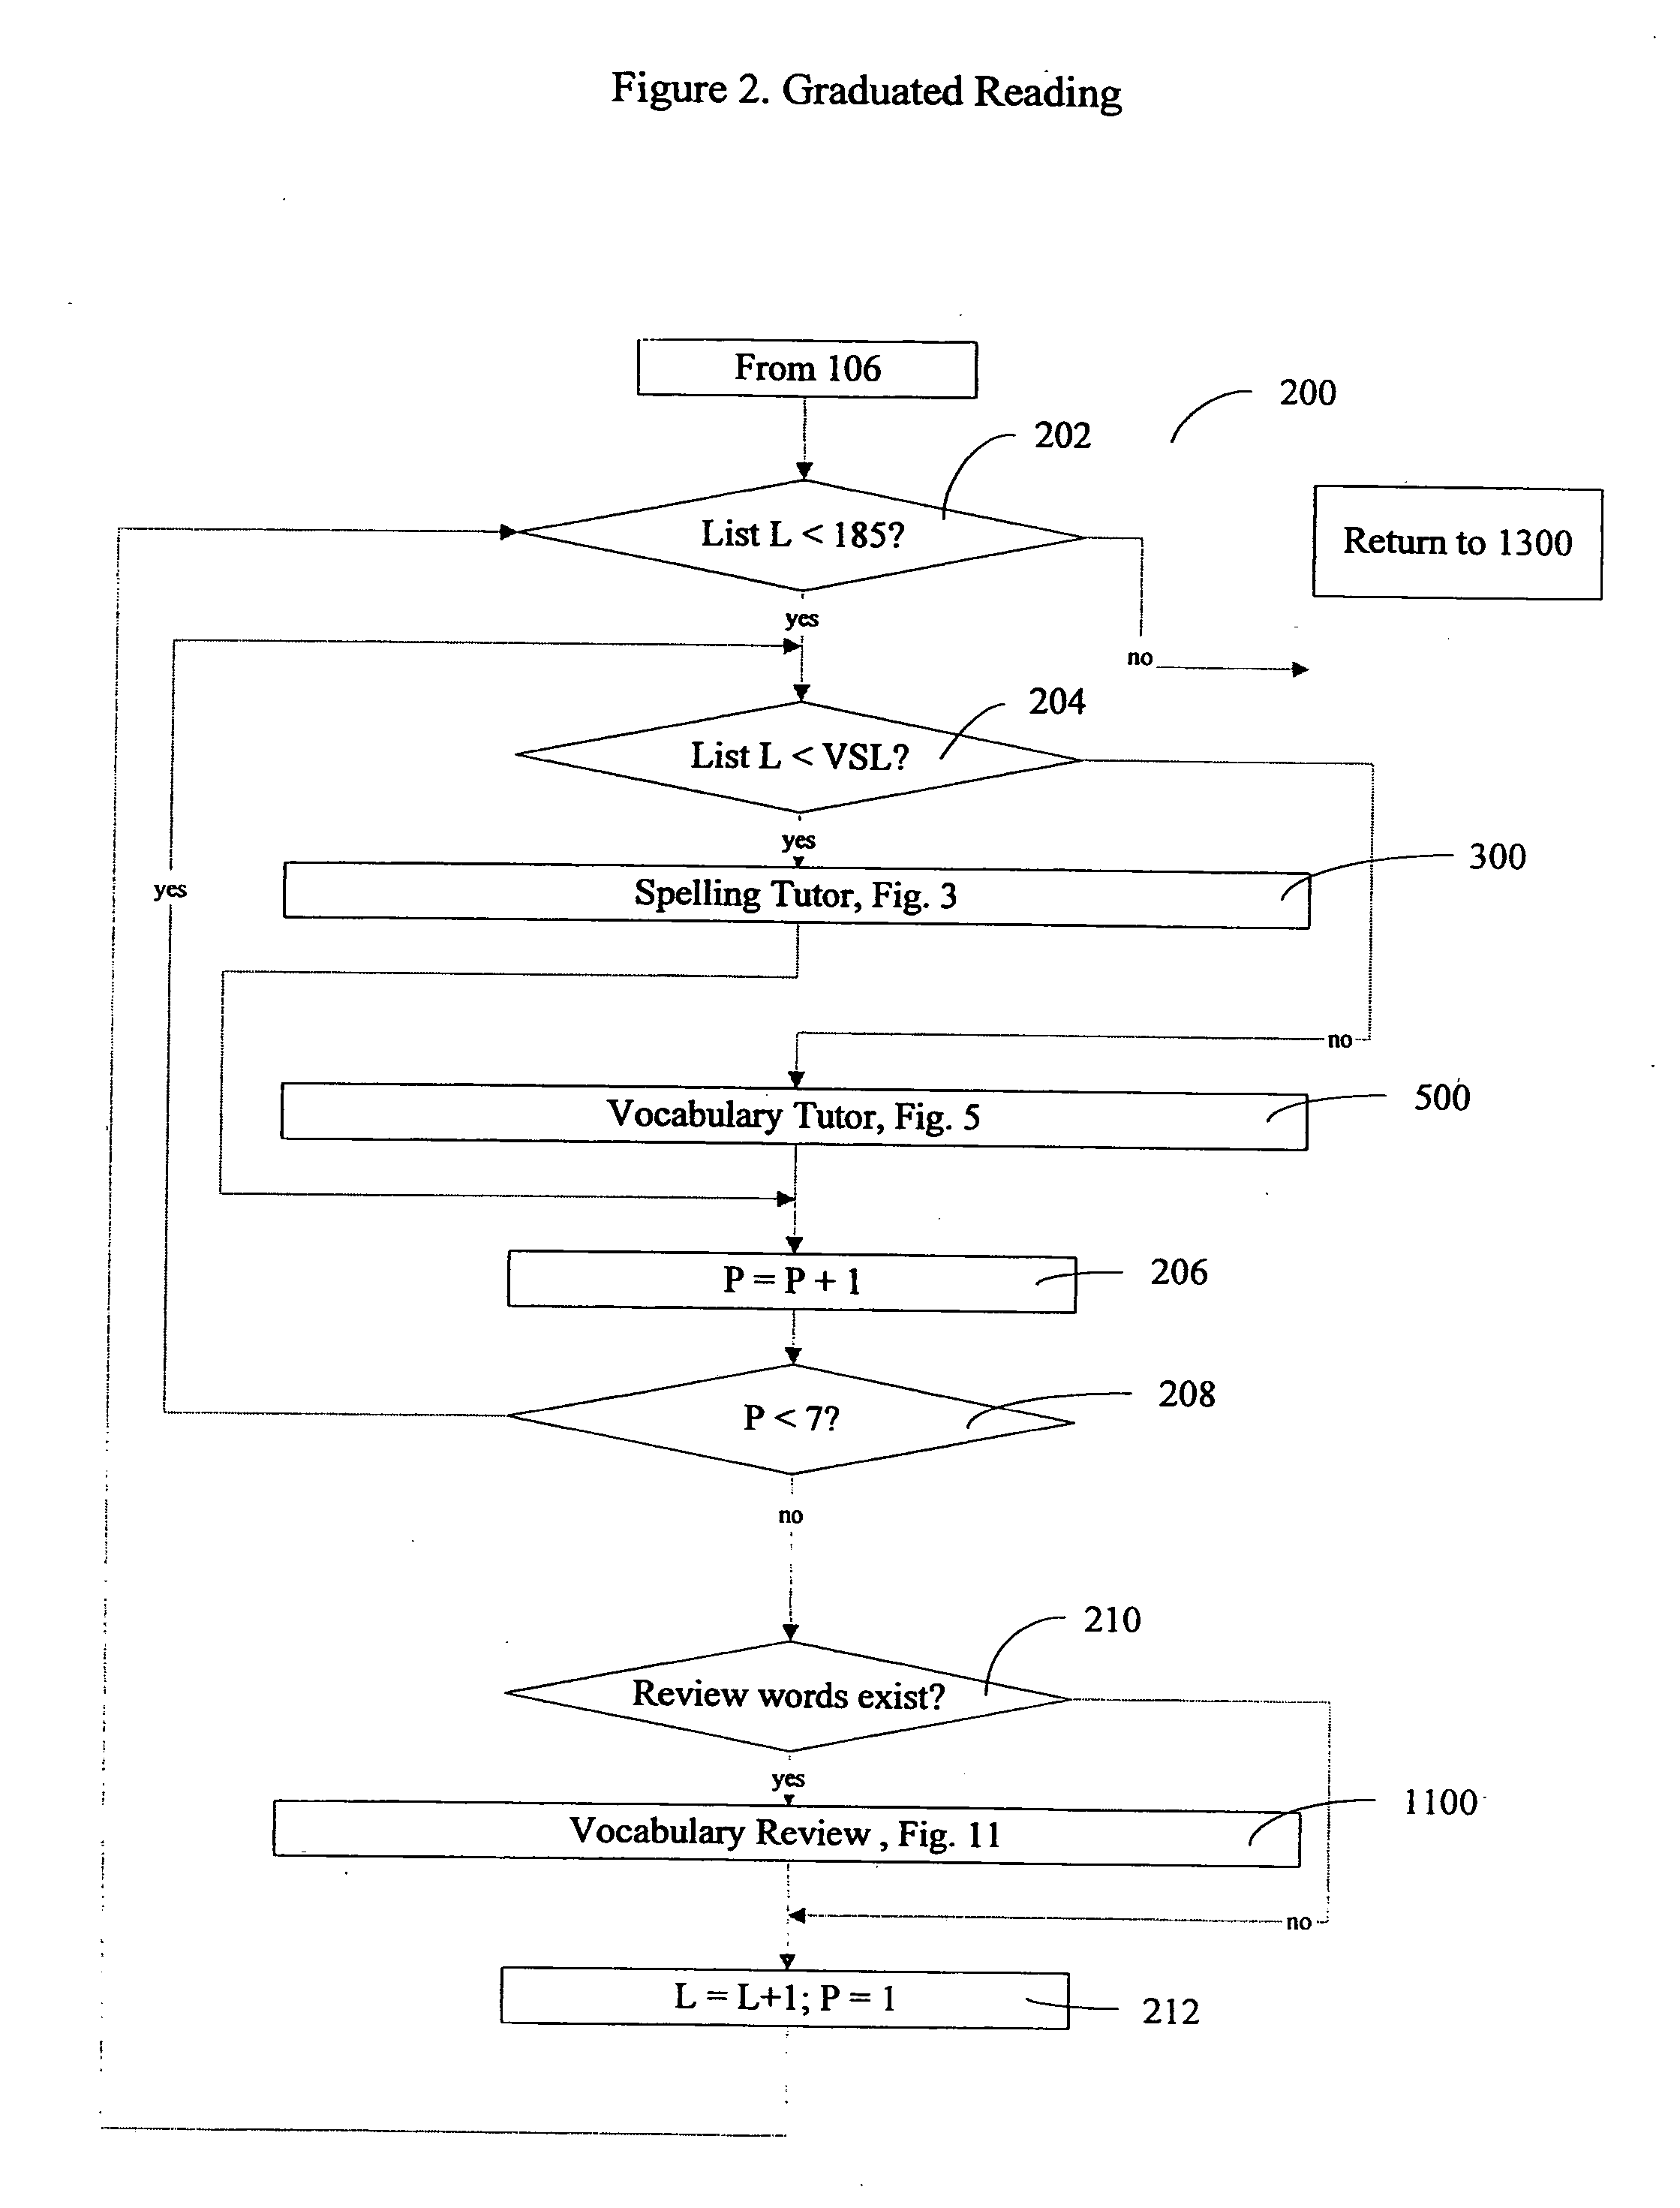 Computer assisted reading tutor apparatus and method